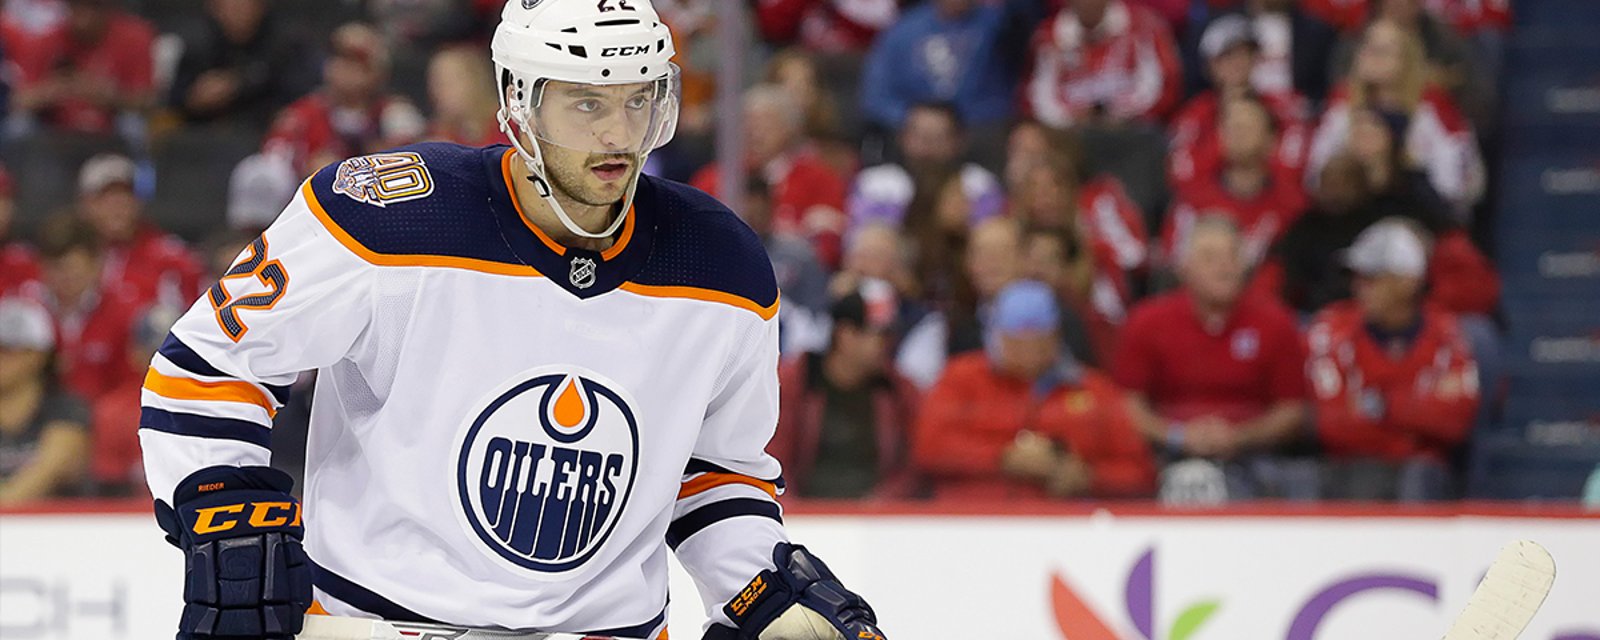 Breaking: Injuries force Oilers to make AHL call up